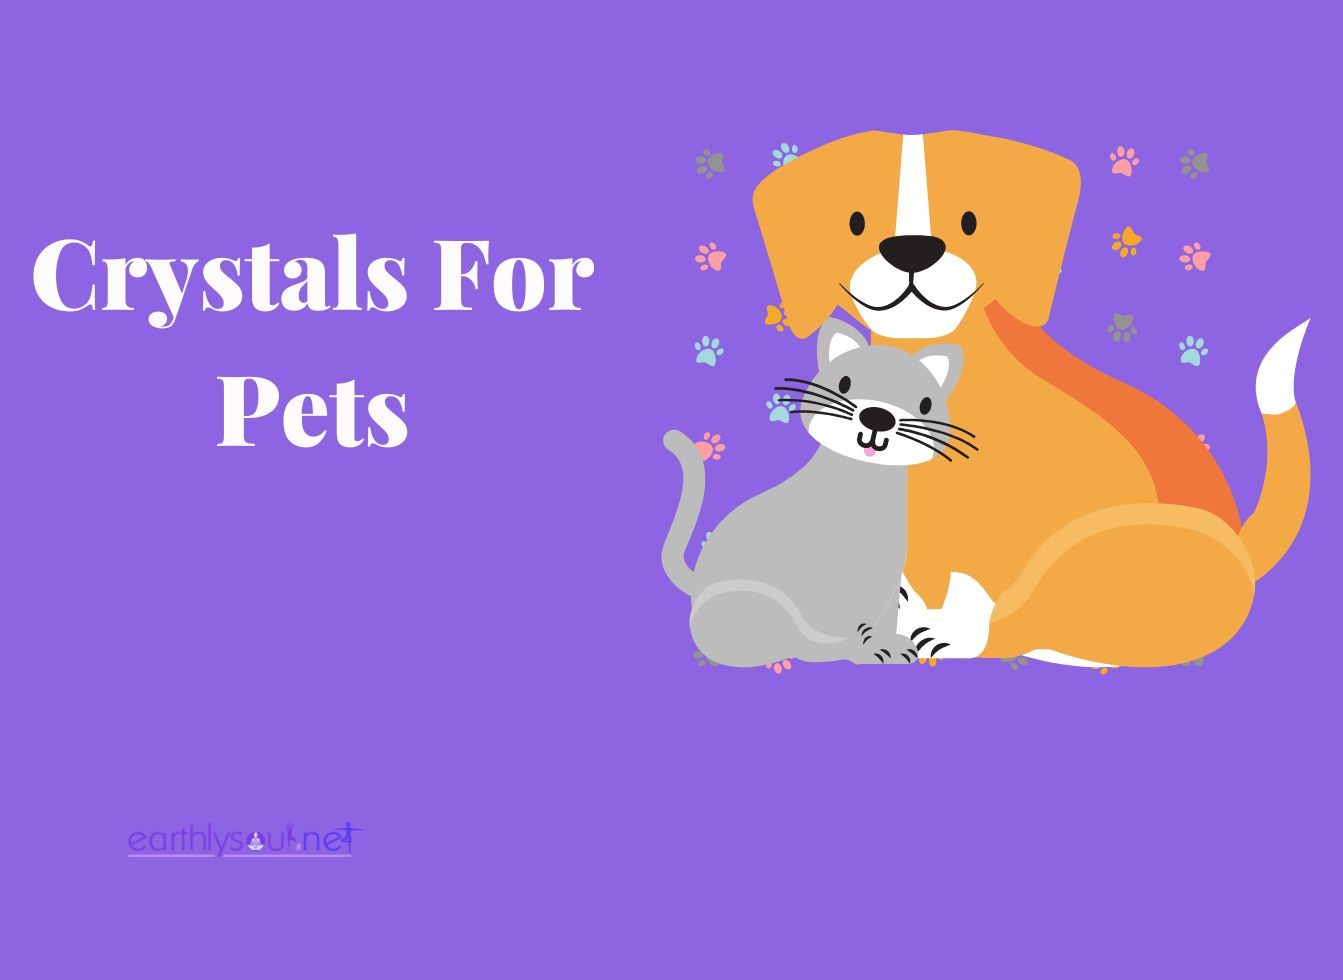 Crystals for pets featured image